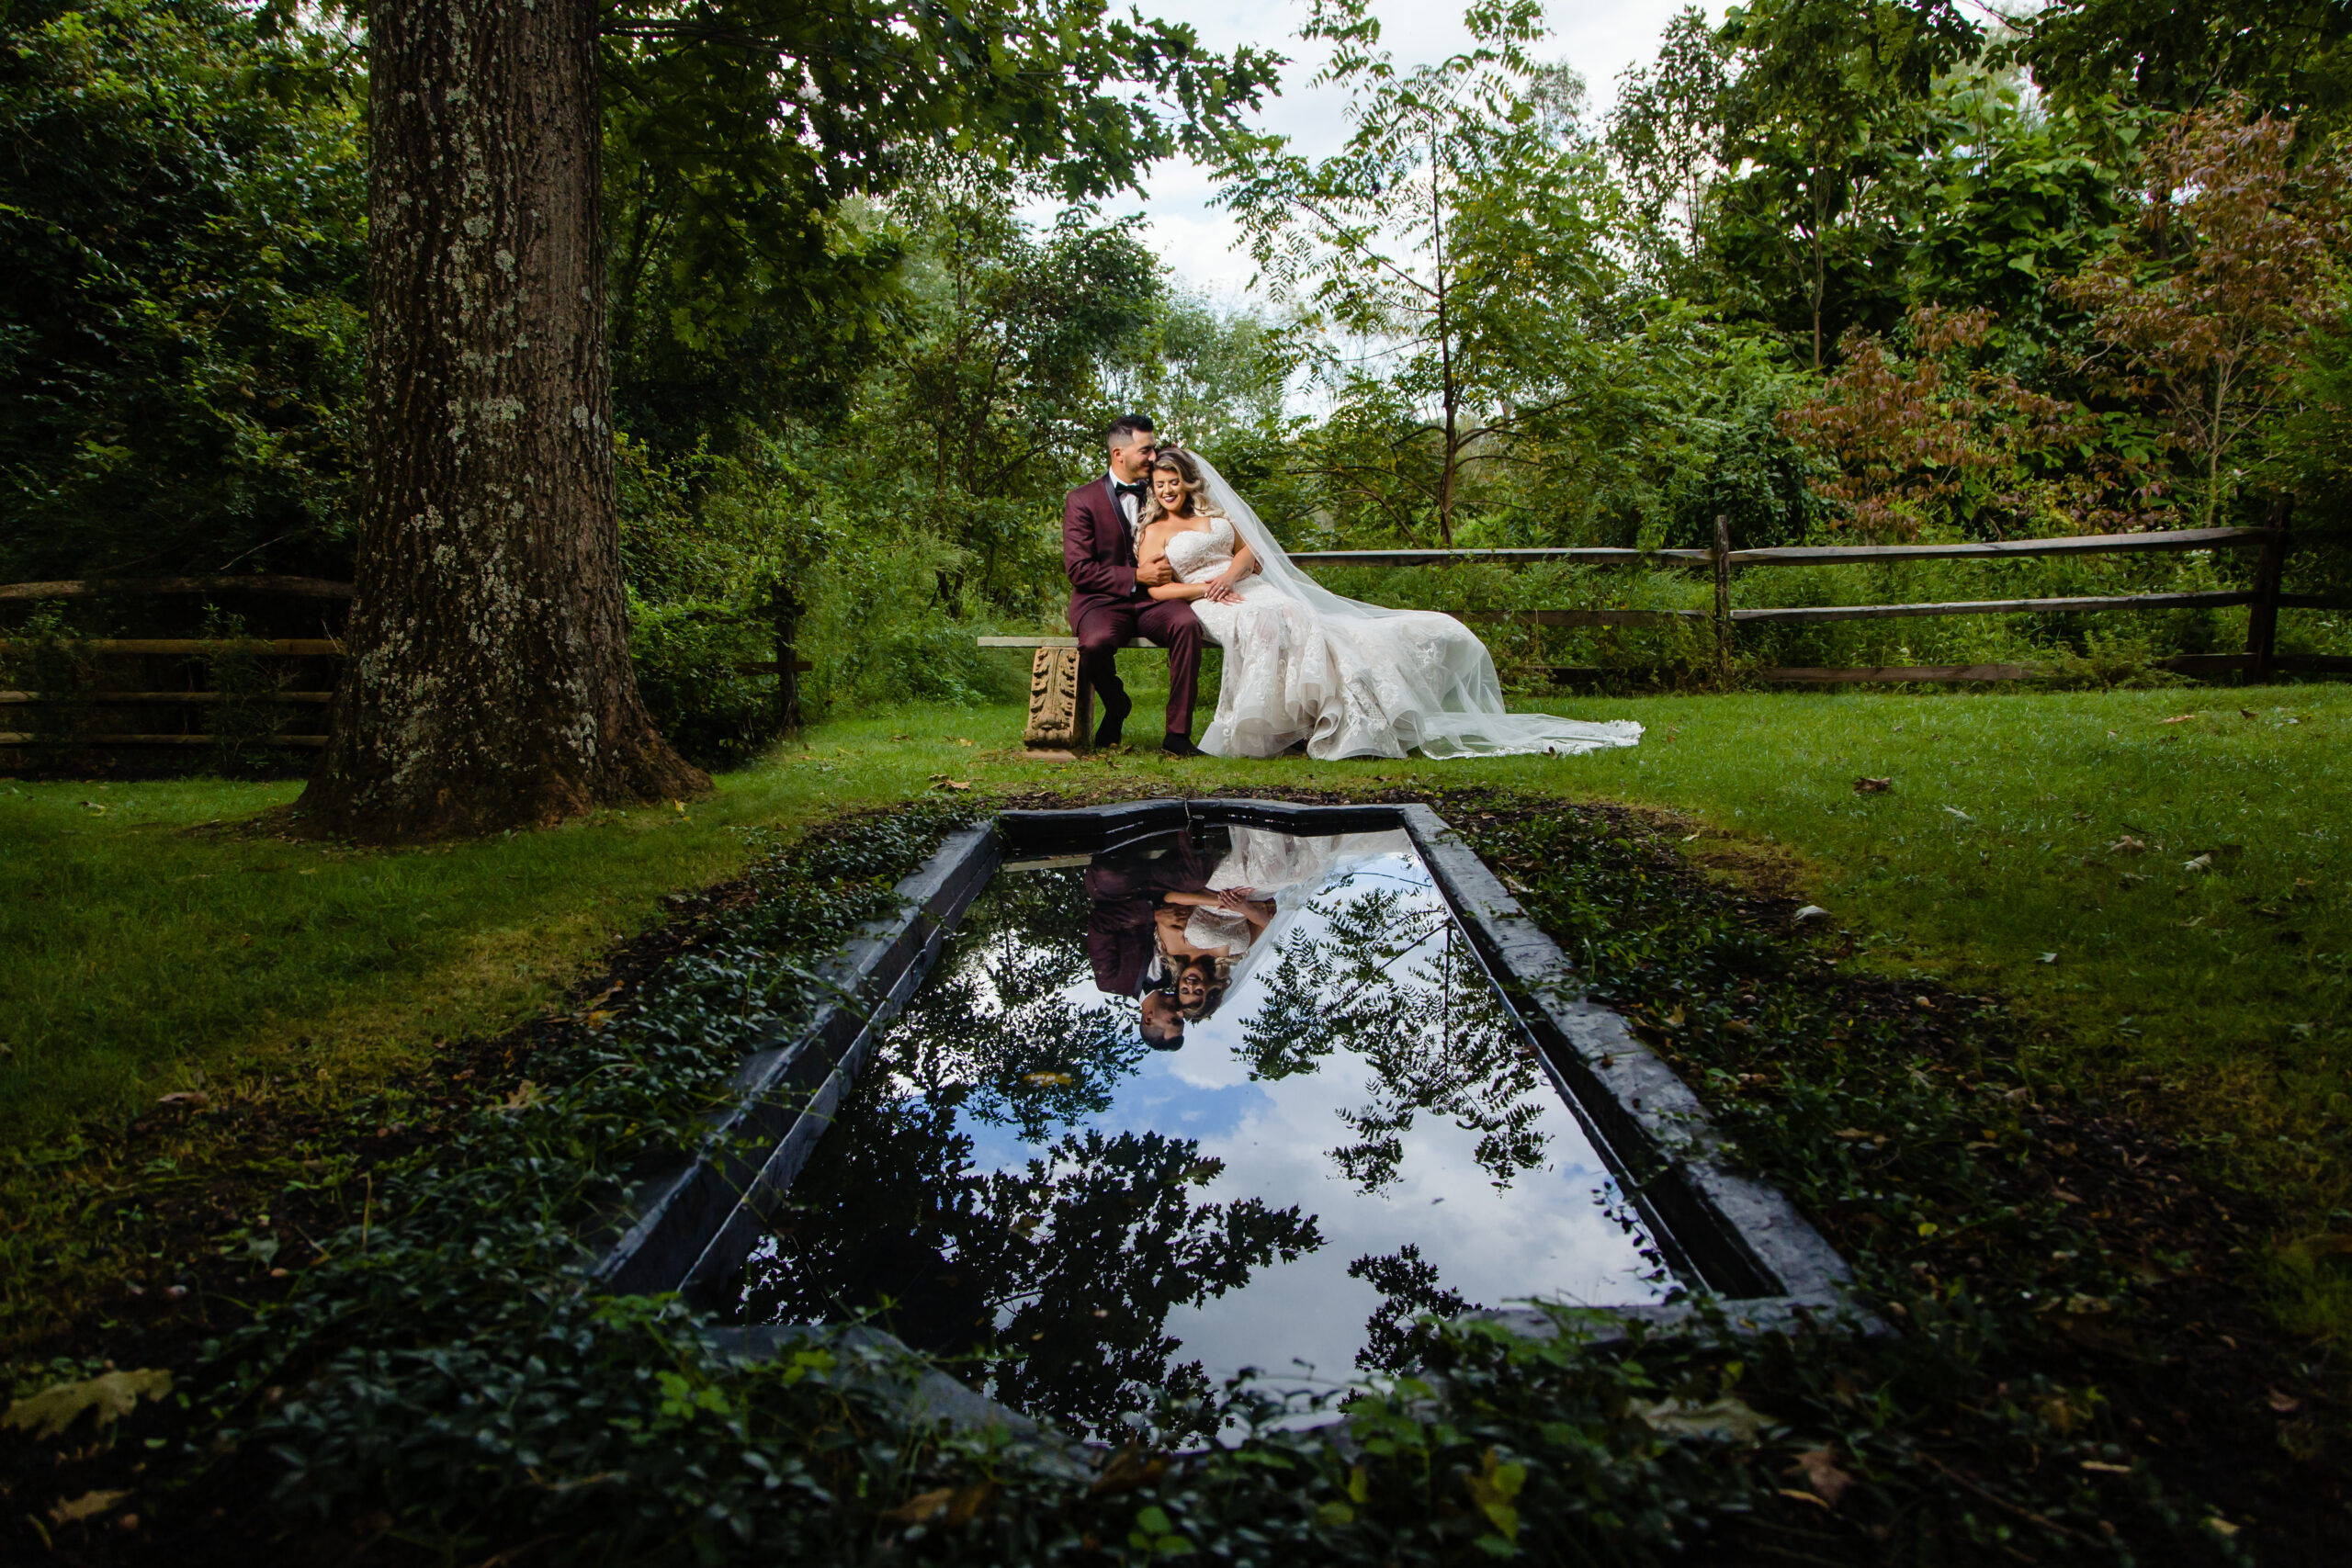 A deeply romantic moment between a newlywed couple, captured at Crossed Keys Estate. They sit on a bench beside a garden pool, their reflections shimmering in the water, creating a poetic and serene scene on their beautiful wedding day. This touching moment was skillfully captured by North Jersey wedding photographer Jarot Bocanegra